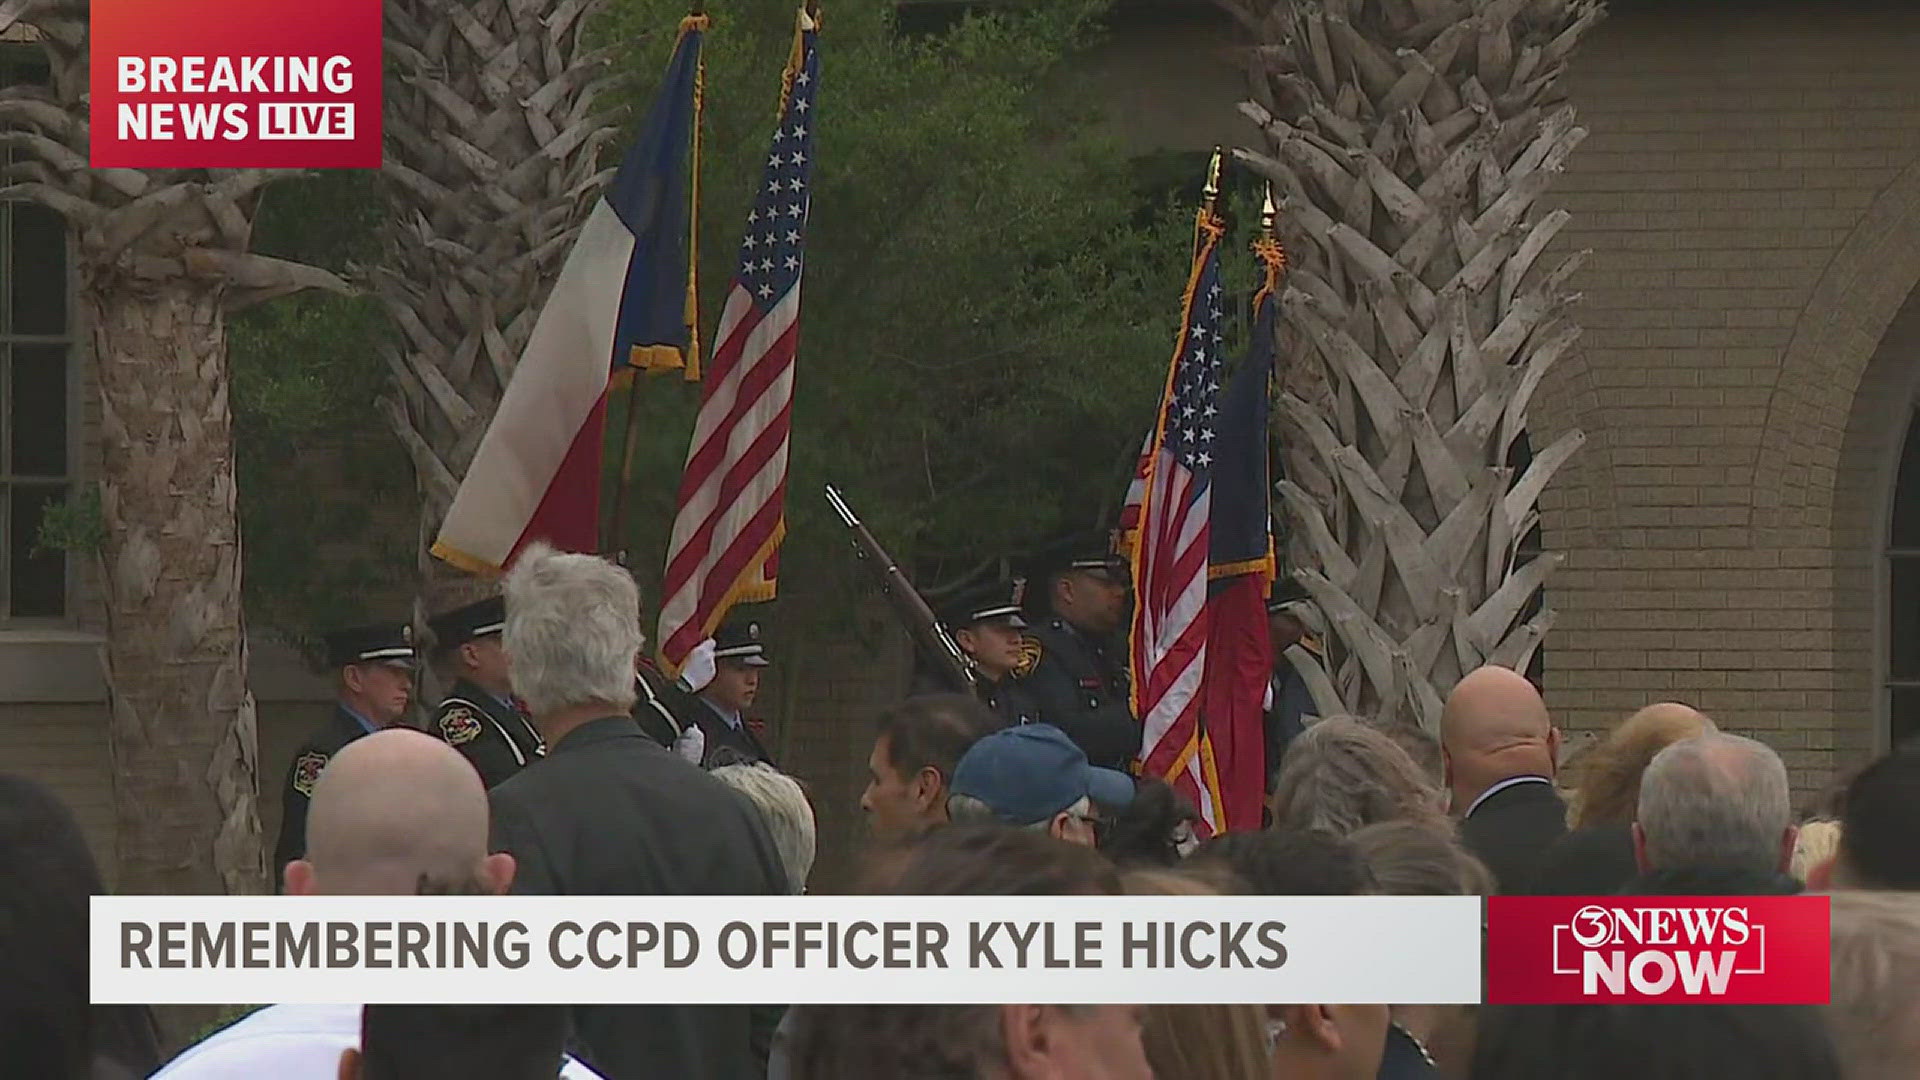 A 21-gun salute and end of watch called were performed at the end of the service in honor of Hicks' sacrifice.